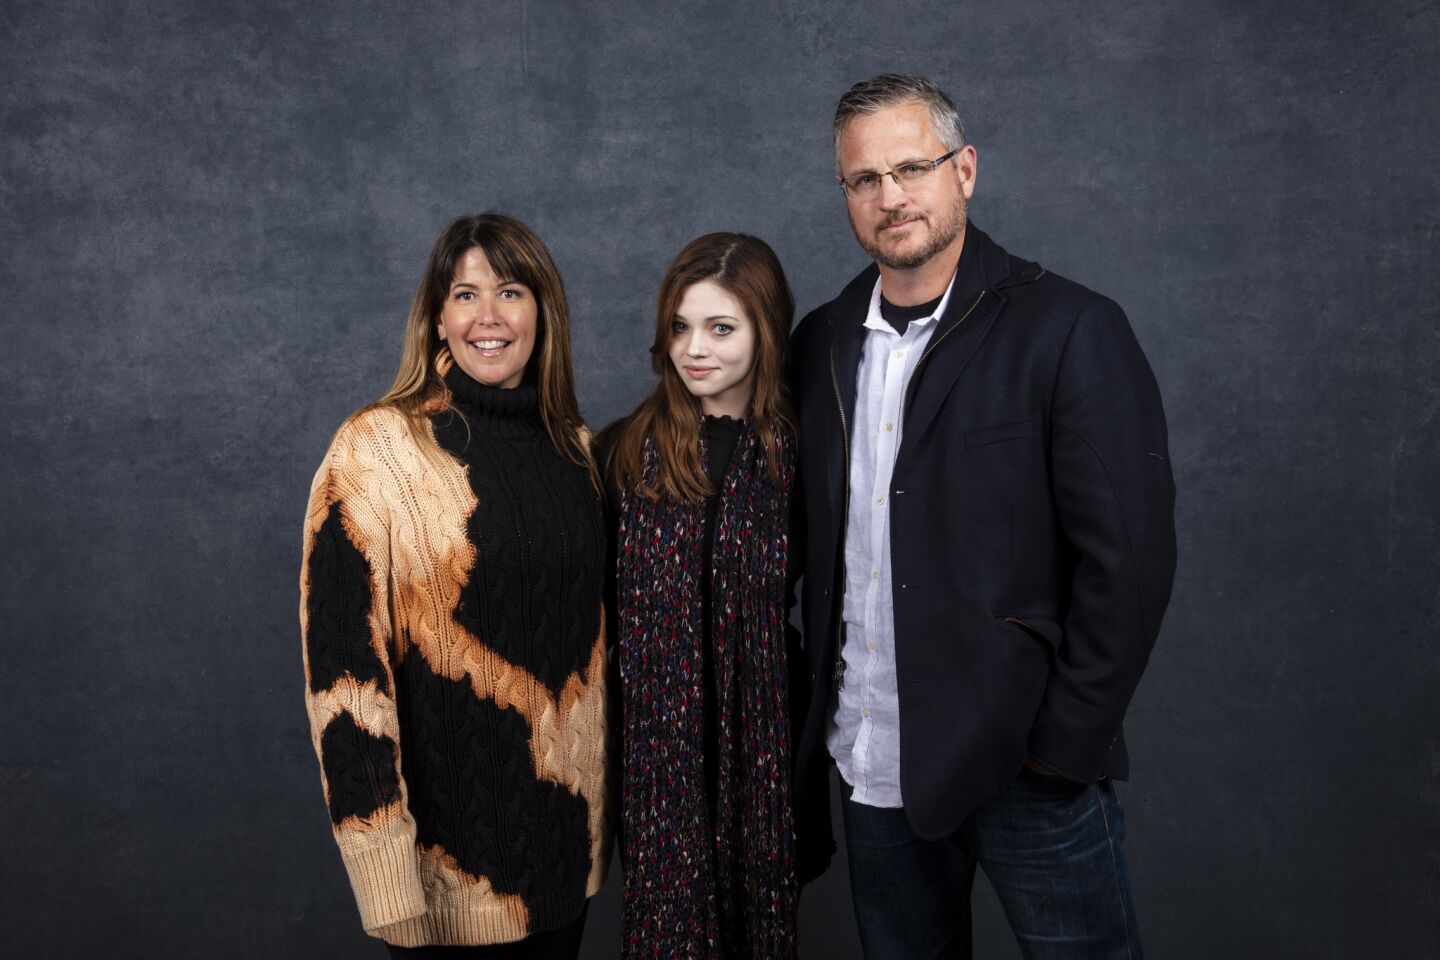 Director Patty Jenkins, actress India Eisley and showrunner Sam Sheridan from the television series "I Am the Night" on TNT.